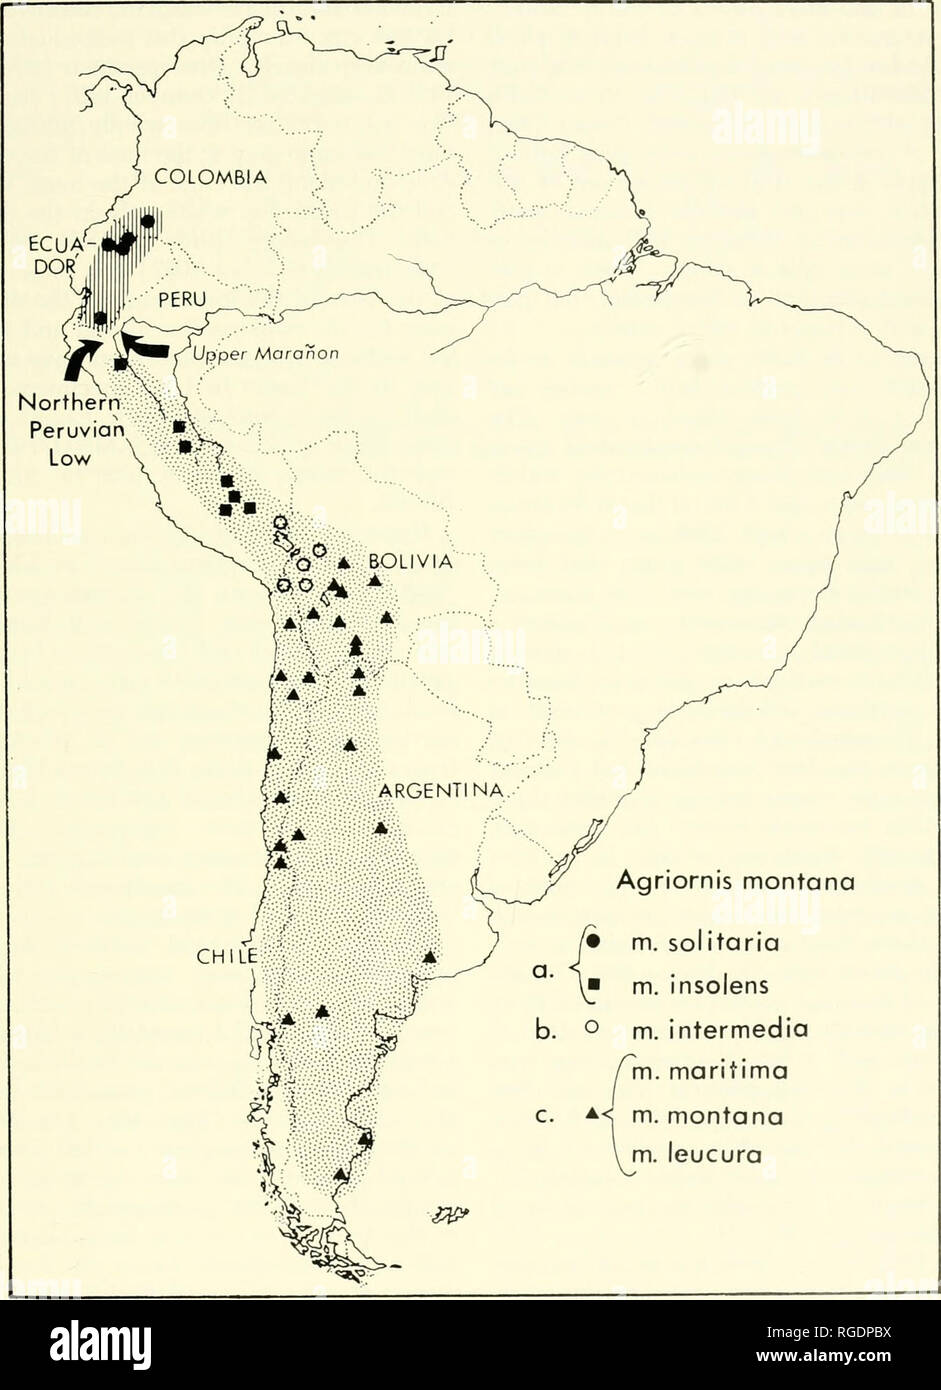 . Bulletin of the Museum of Comparative Zoology at Harvard College. Zoology. Evolution of Ground Tyrants • Smith and Vuilleuinier 209. Fig. 13. Geographical distribution of Agriornis montana. Colombian and Ecuadorean populations [solitaria] are isolated from Peruvian ones (inso/ens) by the Northern Peruvian Low and Upper Maranon barriers (see text). The populations of southern Peru, northwestern Bolivia and extreme northern Chile (b) are intermediate in tail pattern between those to the north (a) and south (c). See text for further details.. Please note that these images are extracted from sca Stock Photo